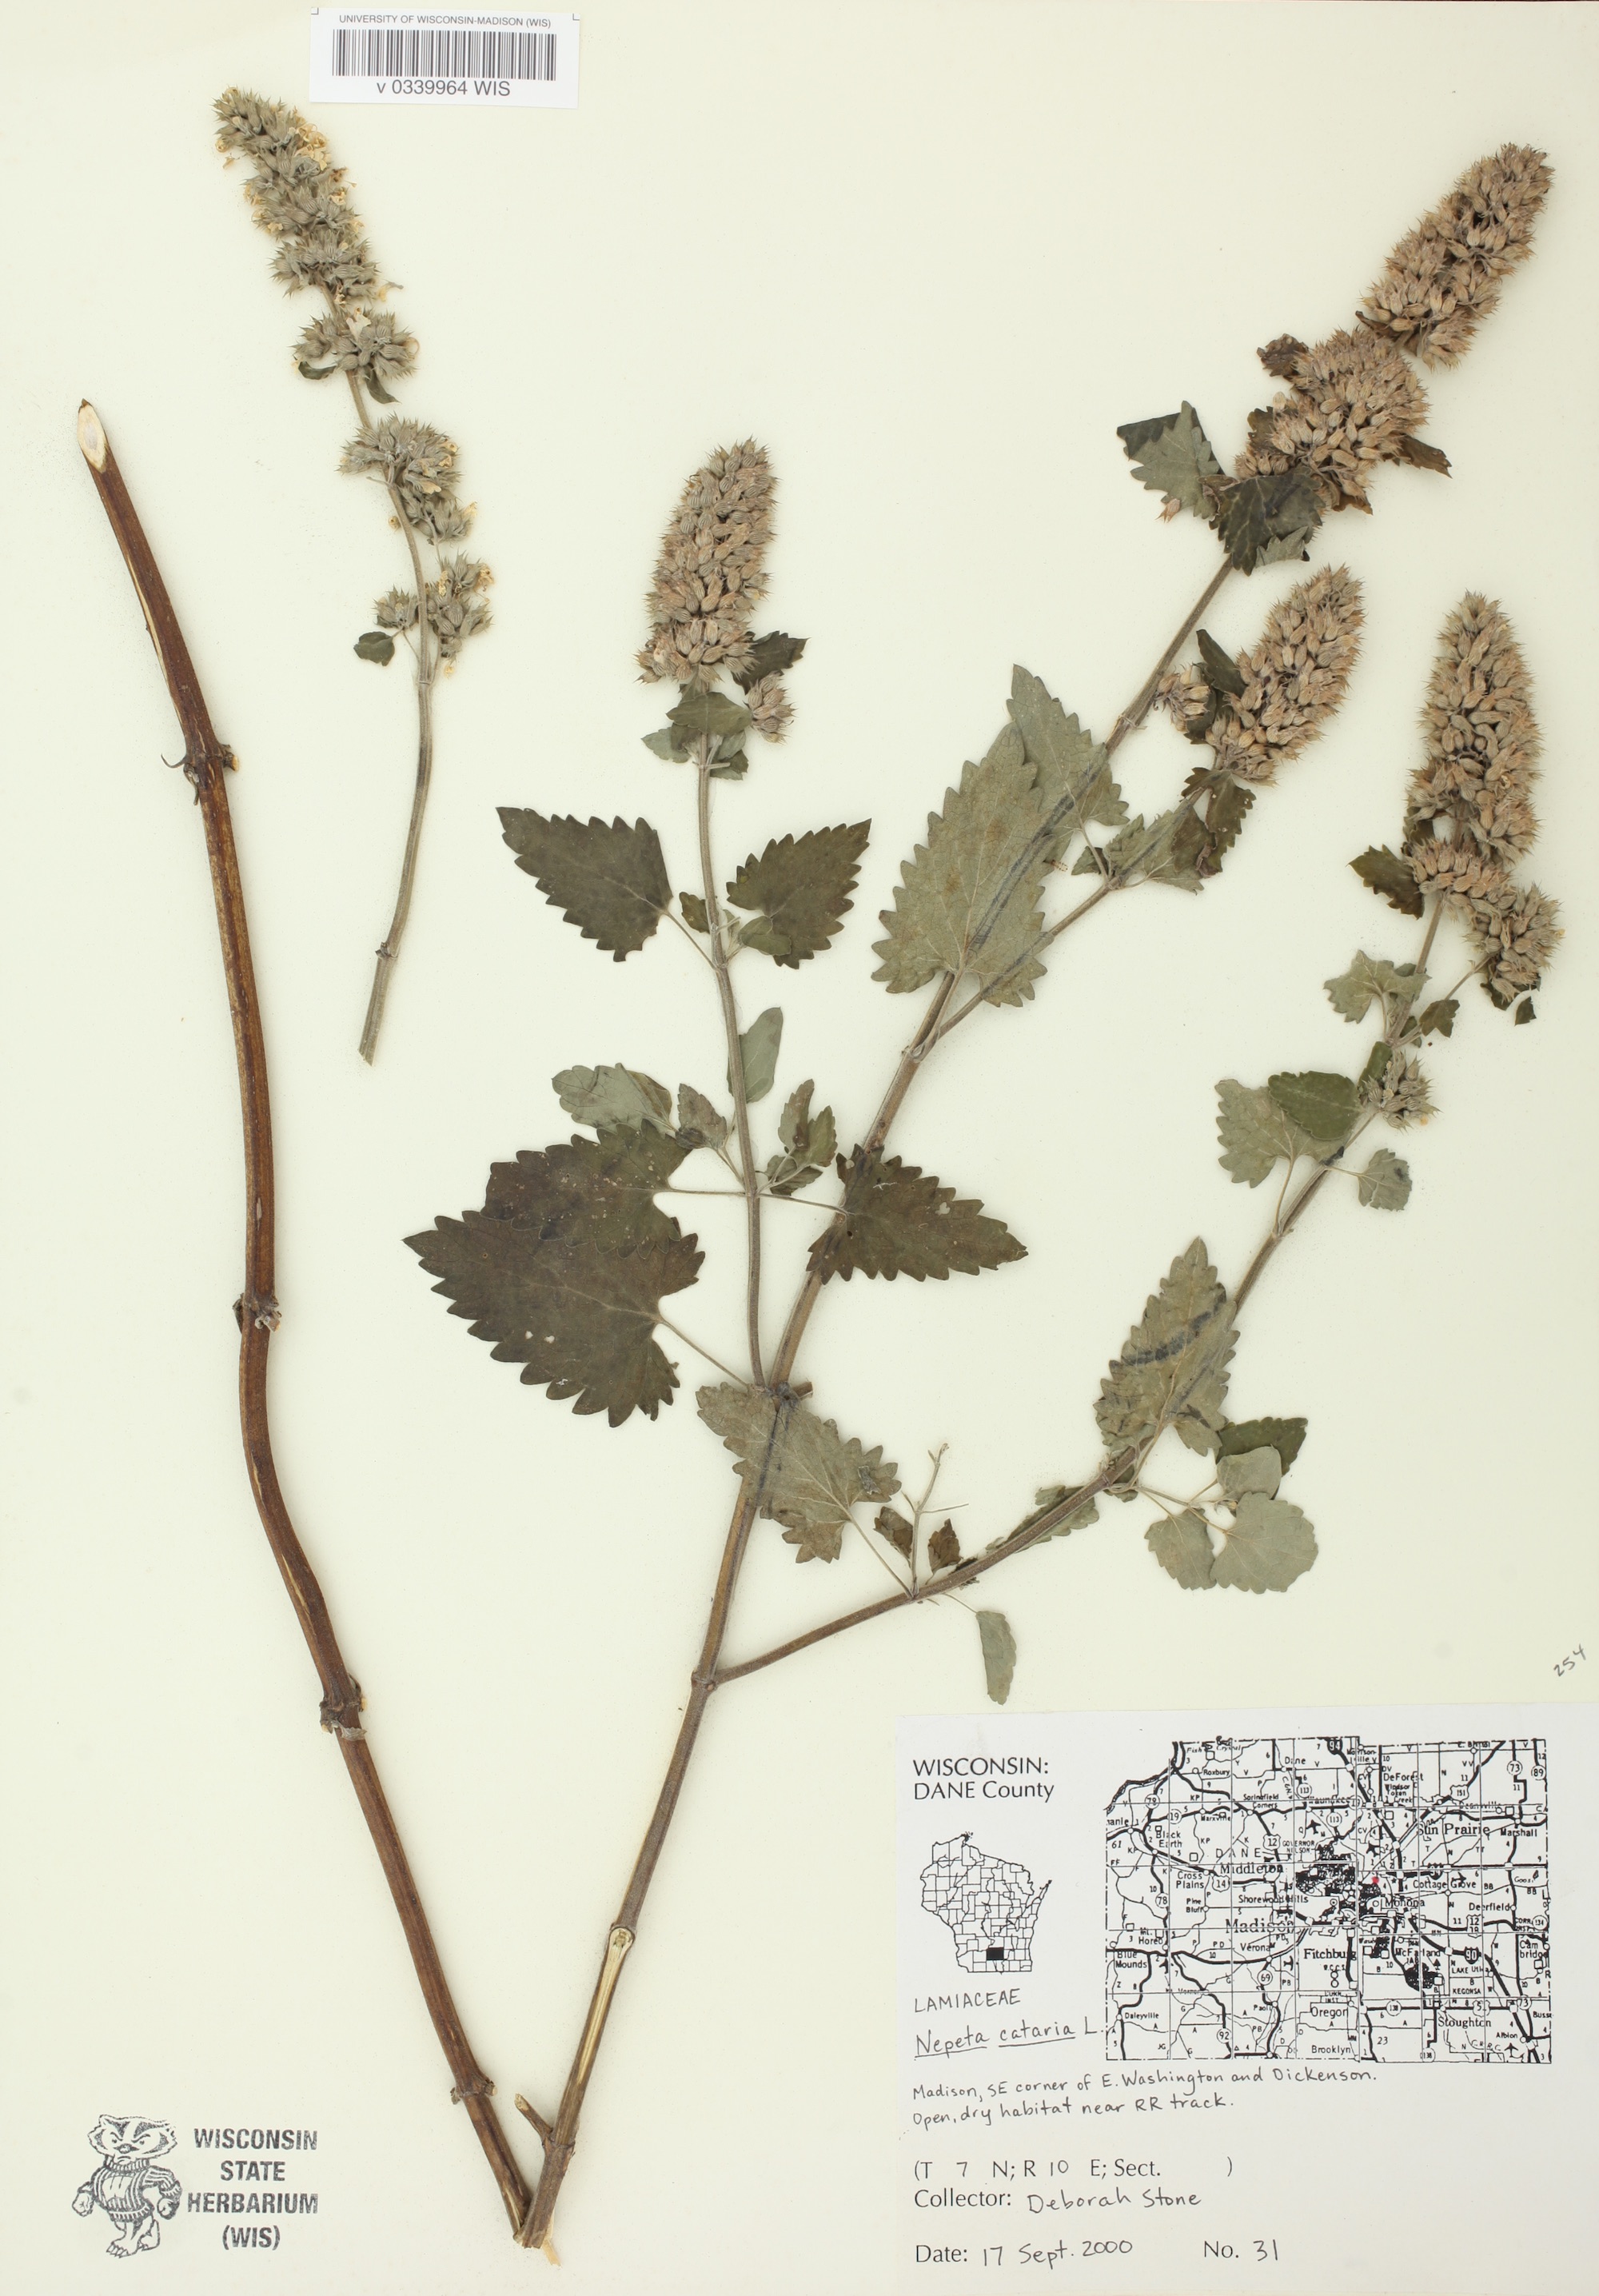 Catnip specimen collected in Madison, Wisconsin near railroad track on East Washington and Dickenson on September 17, 2000.